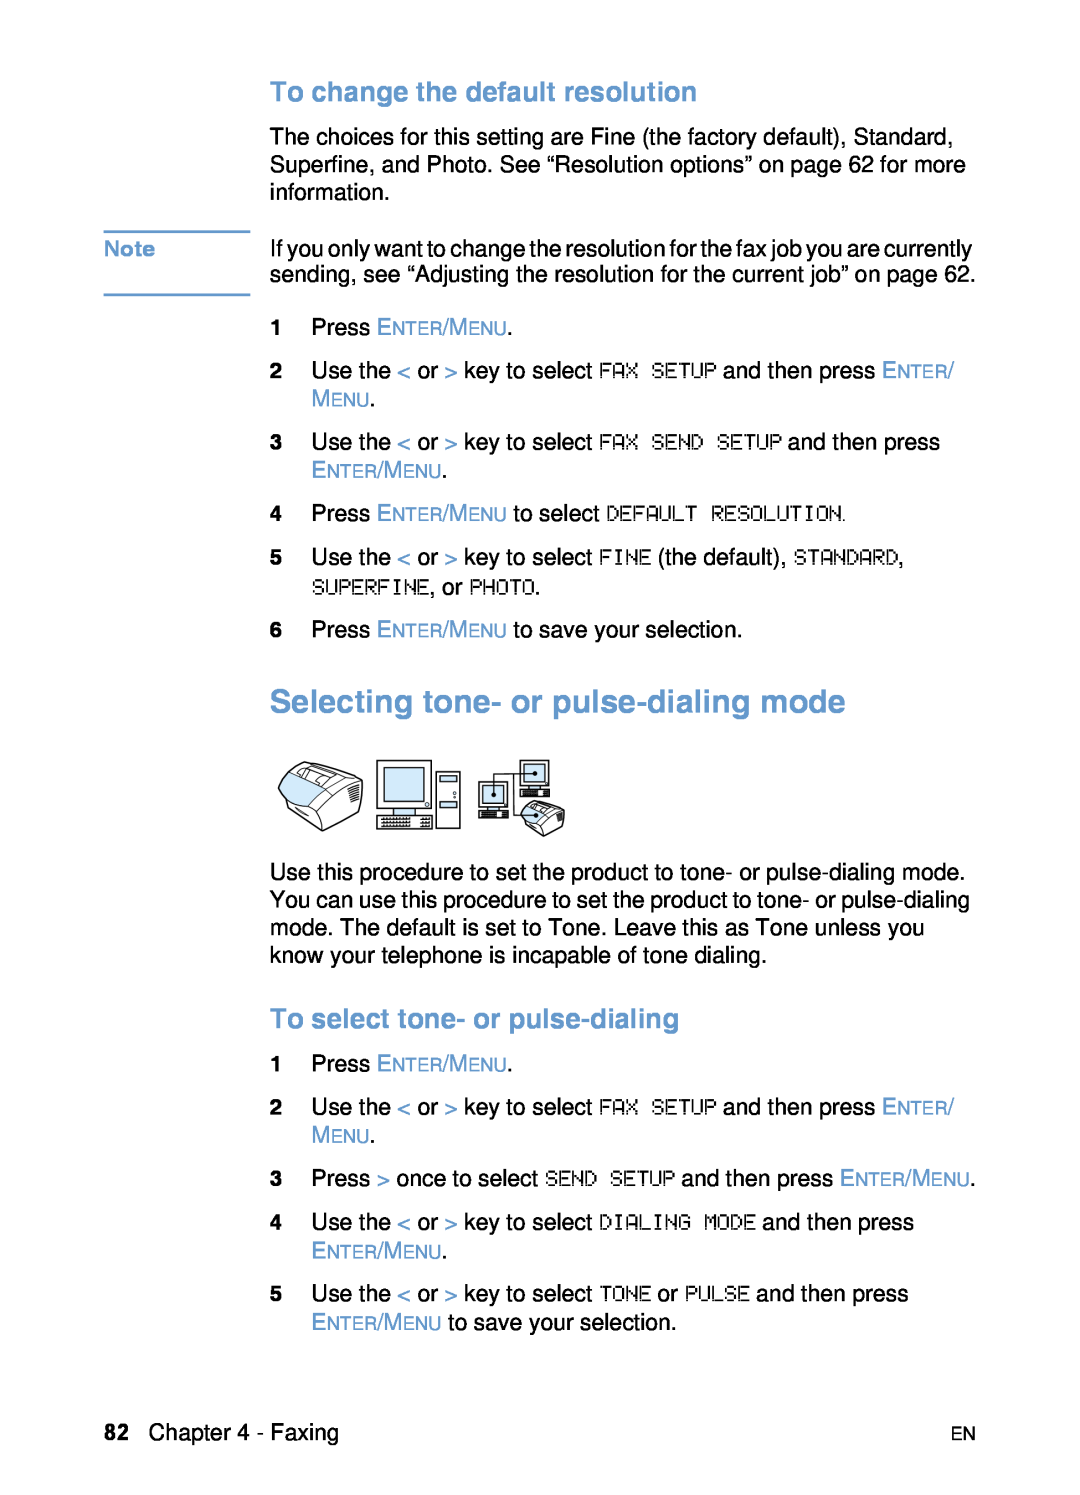 HP 3200 manual Selecting tone- or pulse-dialing mode, To change the default resolution, To select tone- or pulse-dialing 